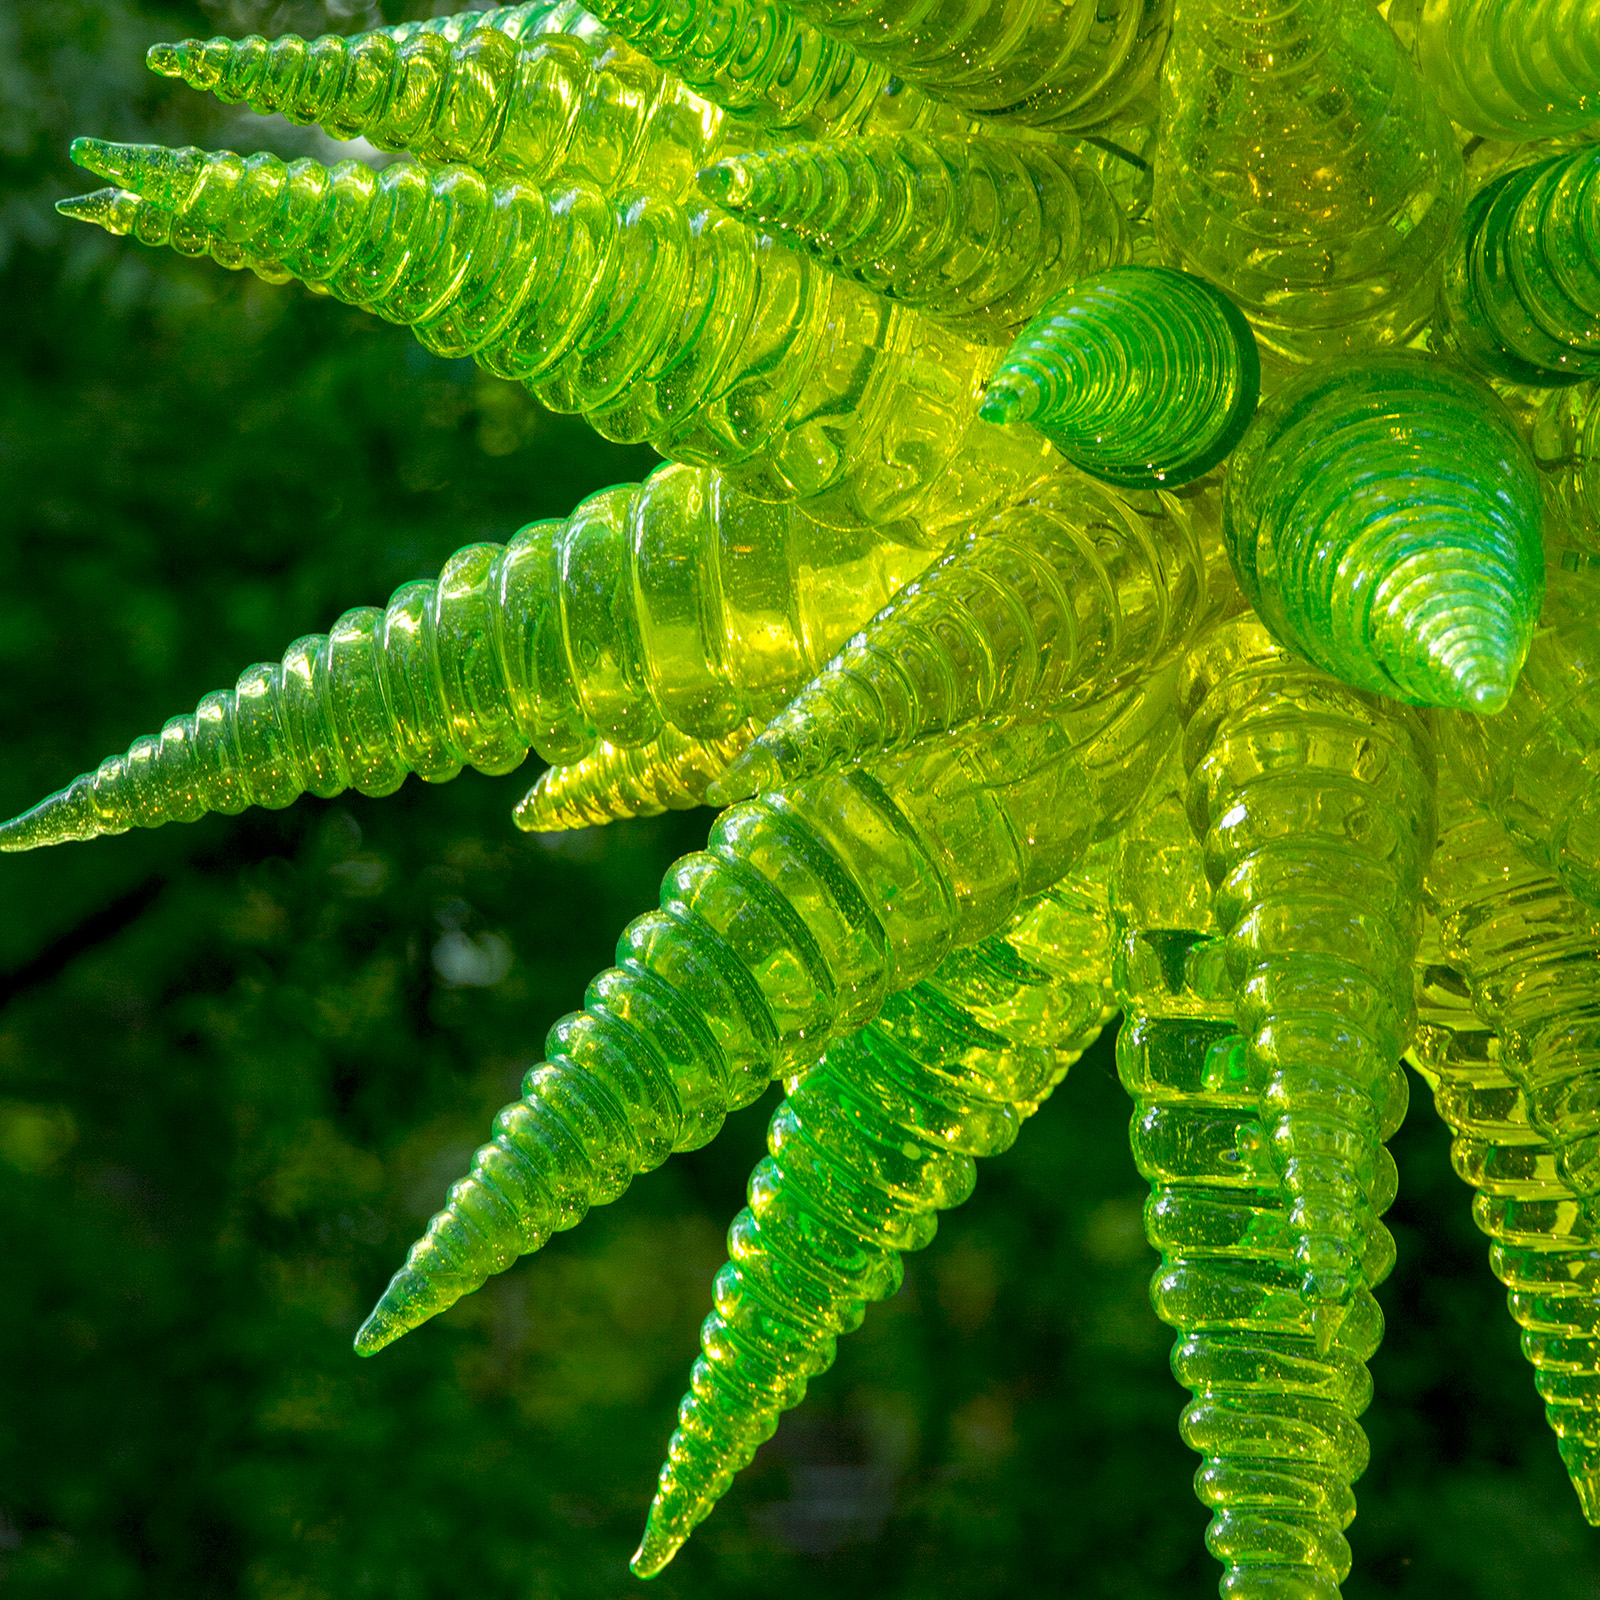 Dale Chihuly, Chartreuse Hornet Polyvitro Chandelier (detail), 2001